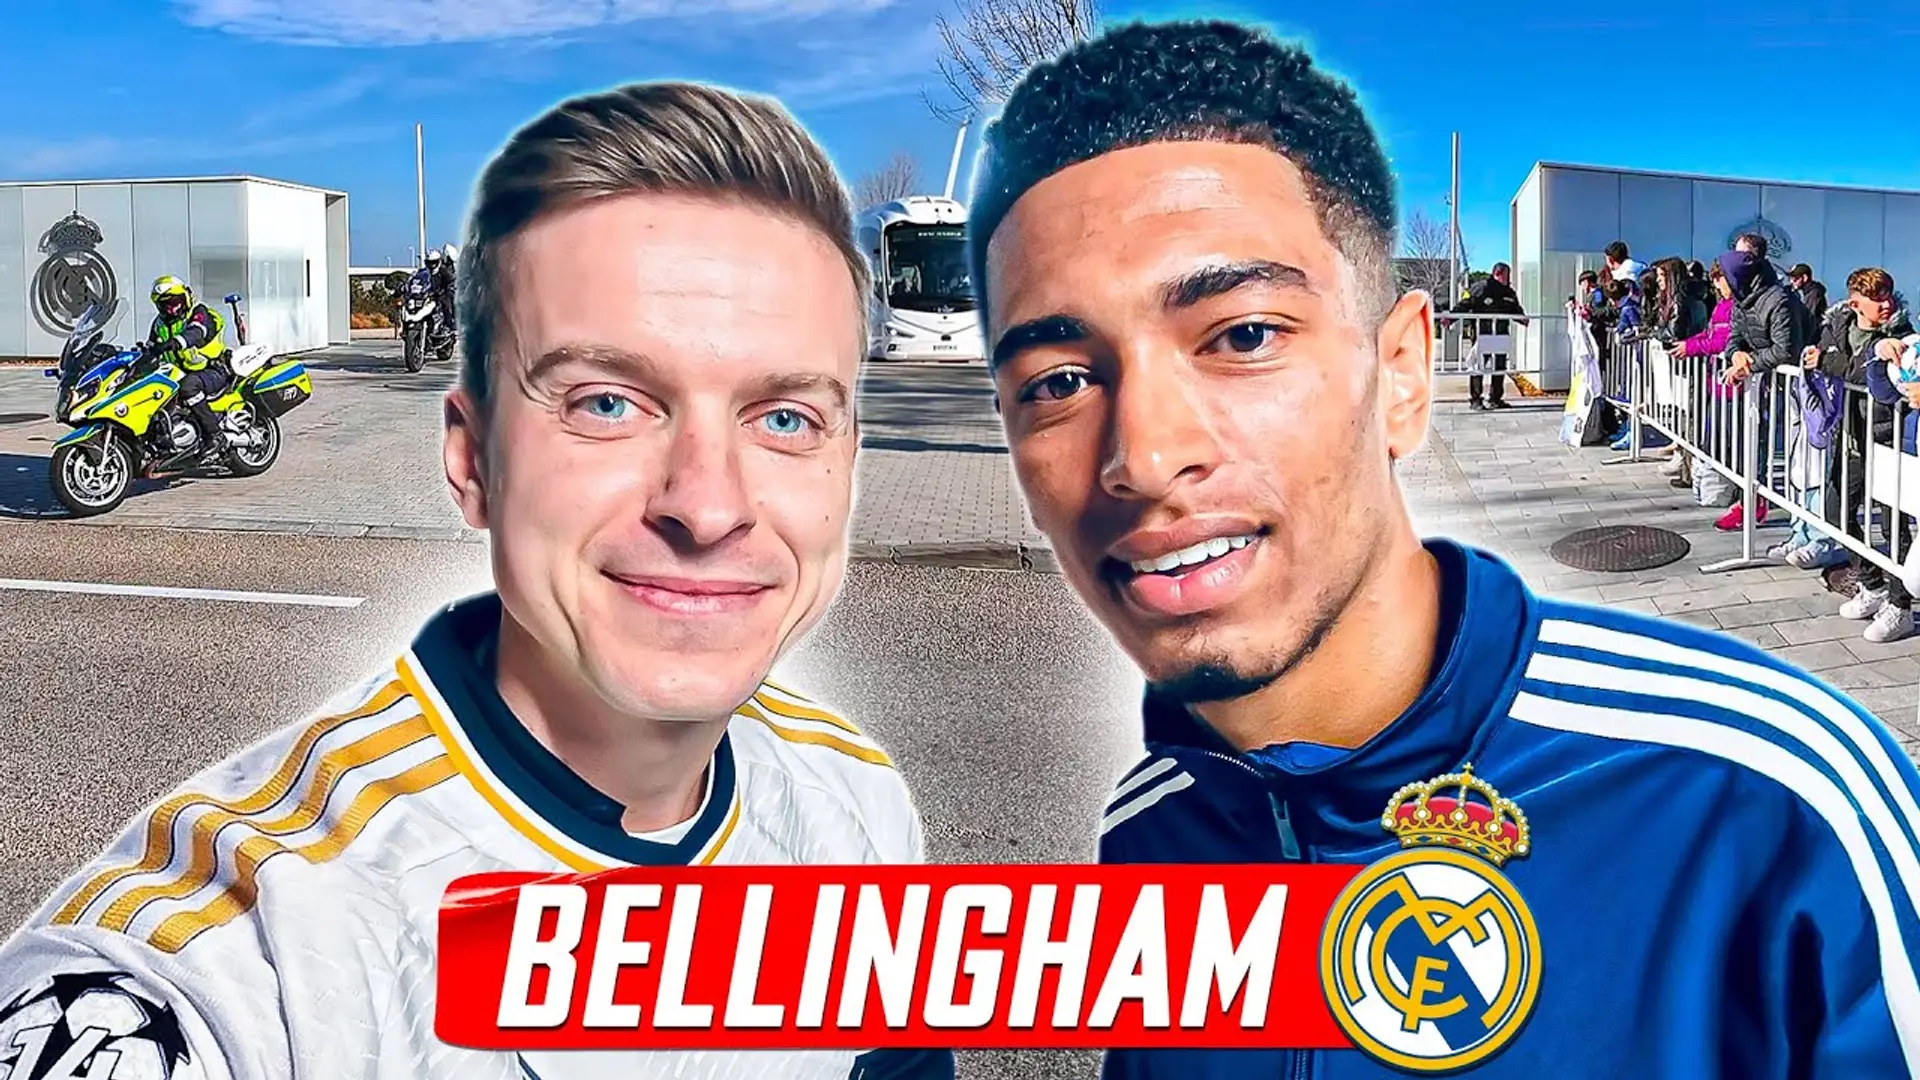 🔥🤩 BELLINGHAM — how to get an autograph from a Real Madrid star (watch on YouTube)